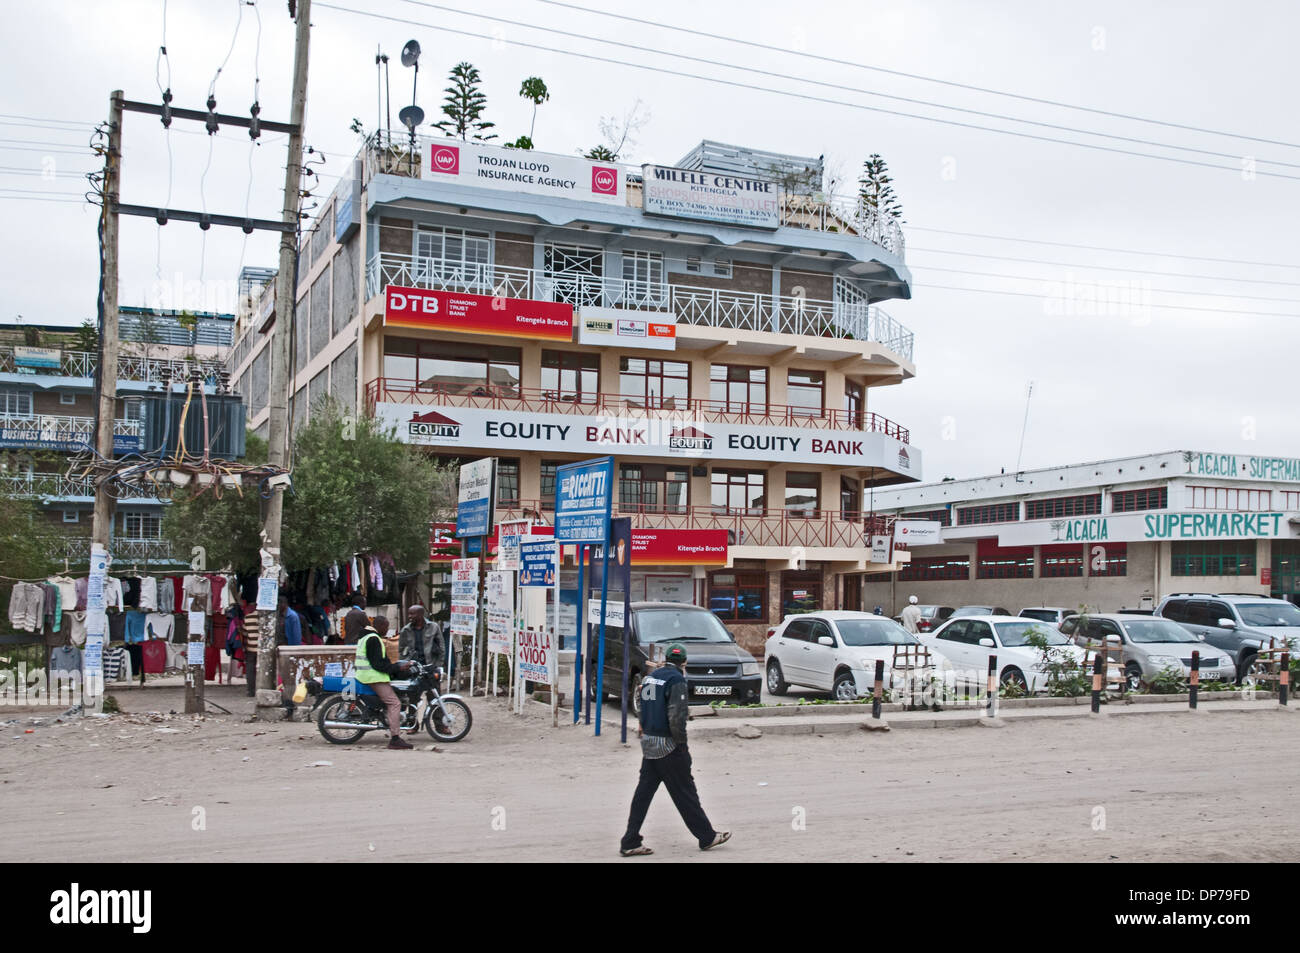 Multi storey office building housing Equity Bank and other businesses adjacent to Acacia Supermarket in Kajiado Kenya Stock Photo